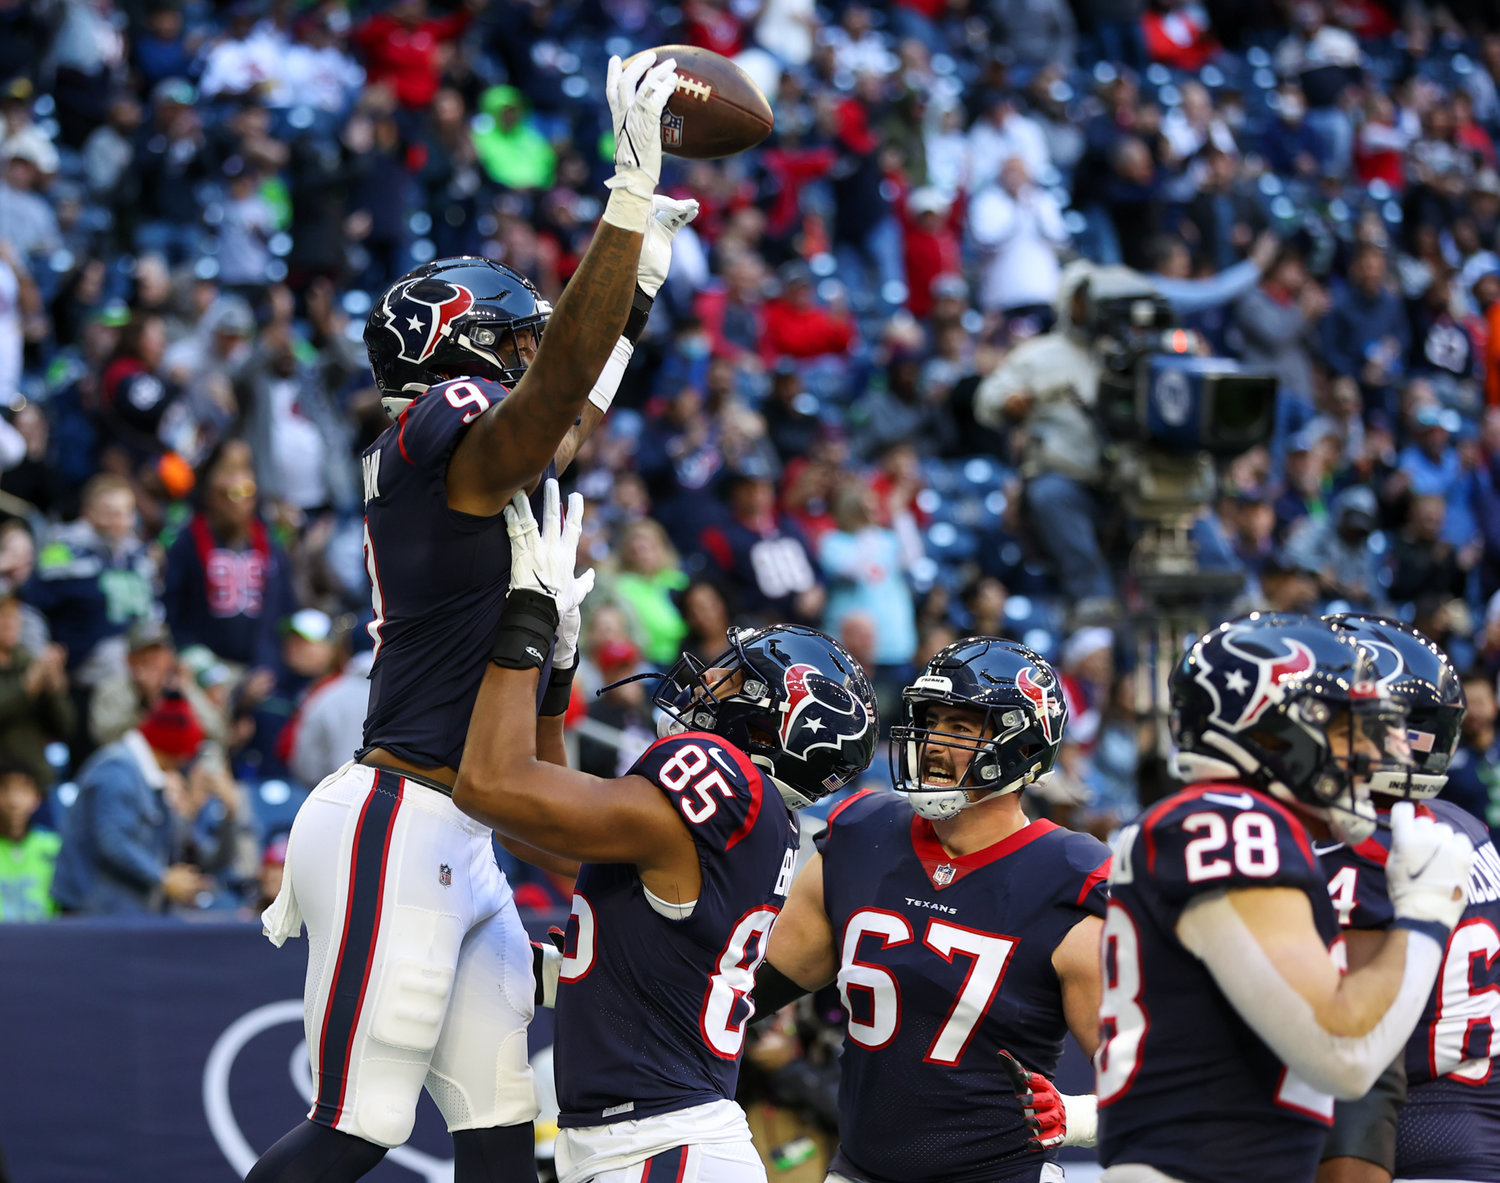 Teammates congratulate Houston Texans tight end Brevin Jordan (9) after a touchdown during the first half of an NFL game between the Seahawks and the Texans on December 12, 2021 in Houston, Texas.